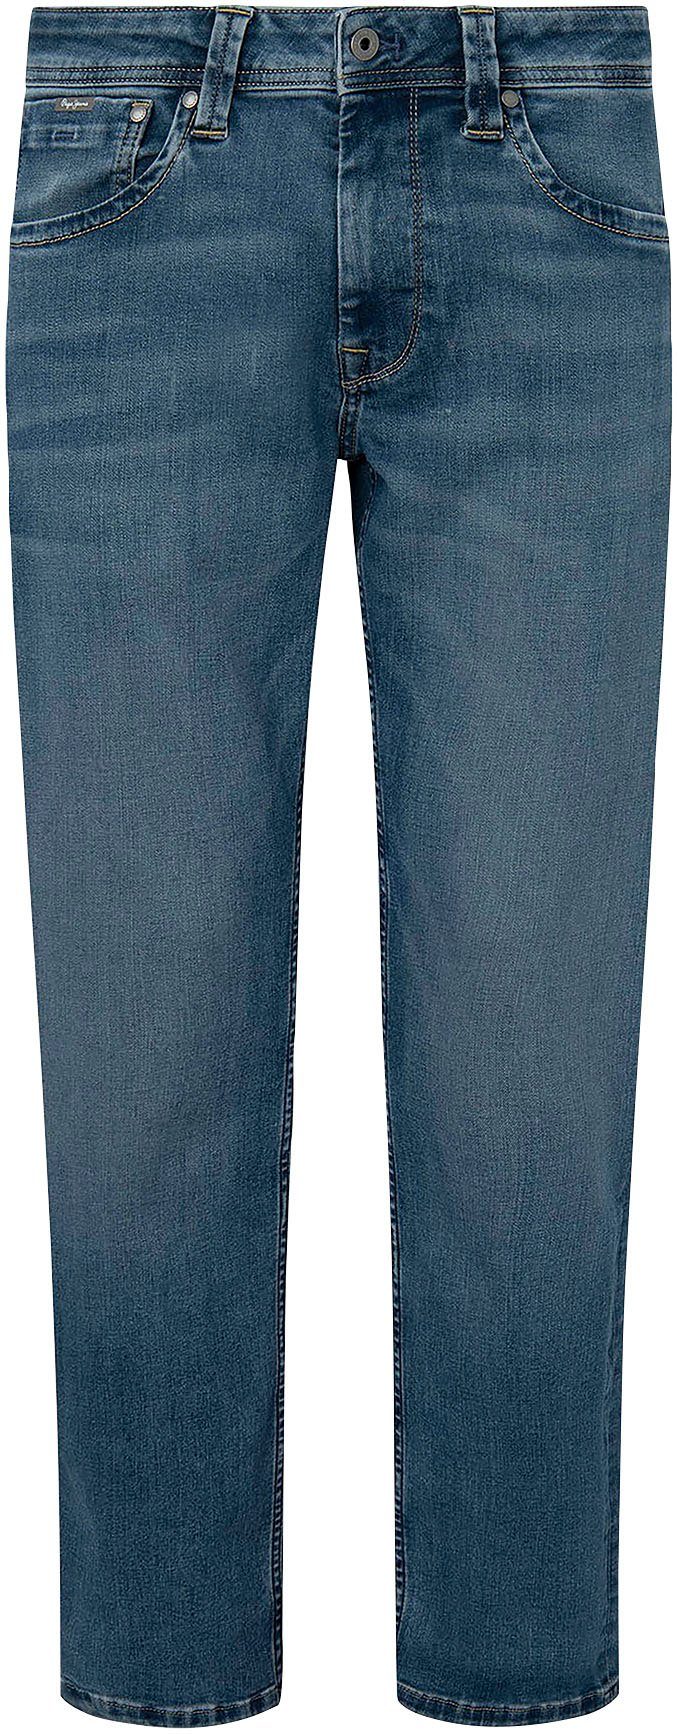 limewiser 5-Pocket-Form in ZIP Straight-Jeans Pepe KINGSTON Jeans